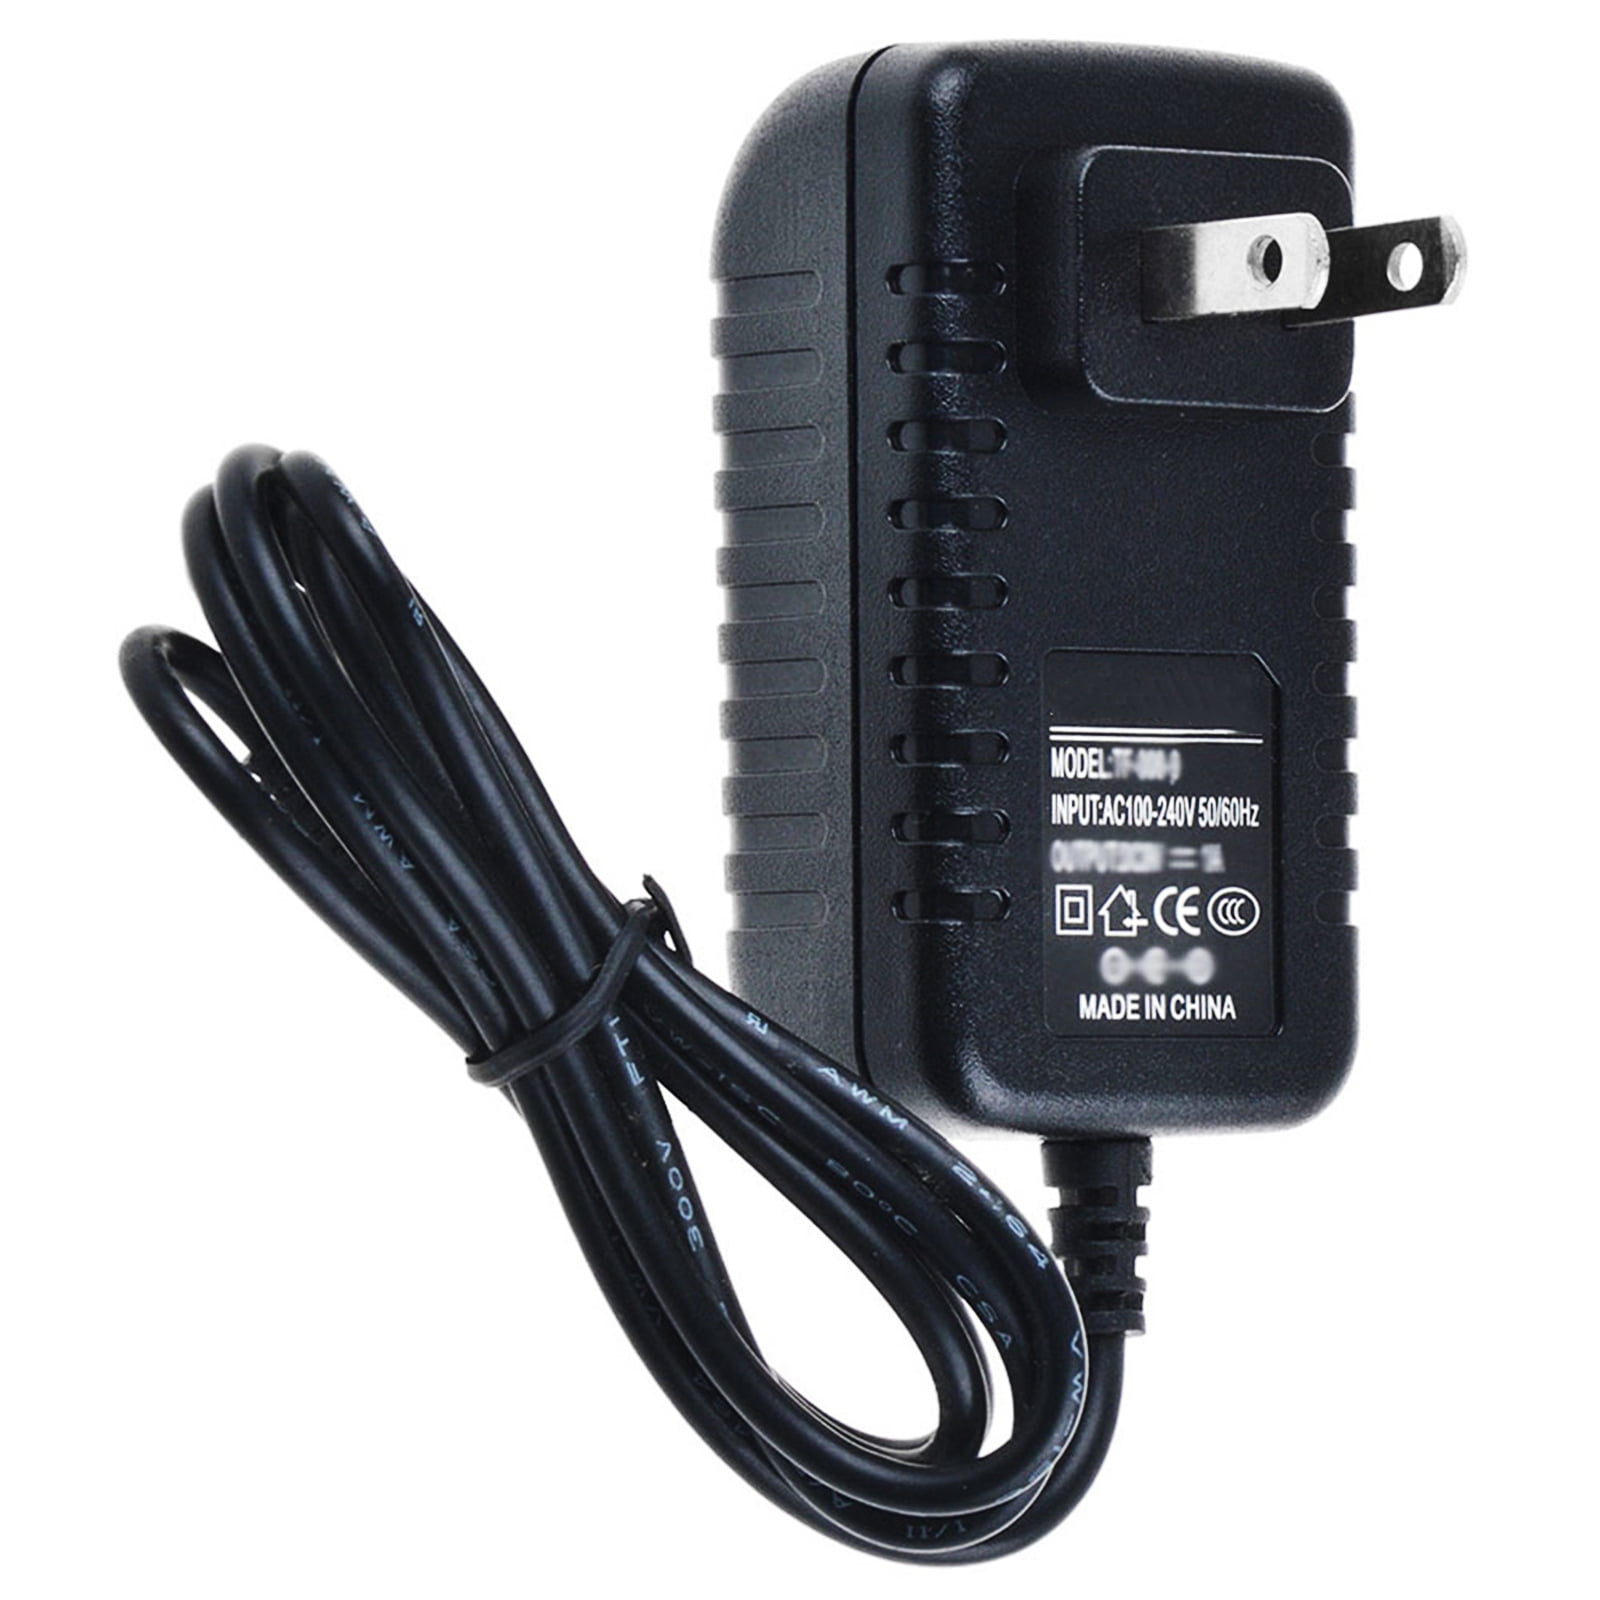 AC Adapter Power Supply for Proform 800 and 820 Cardio Cross Trainer 